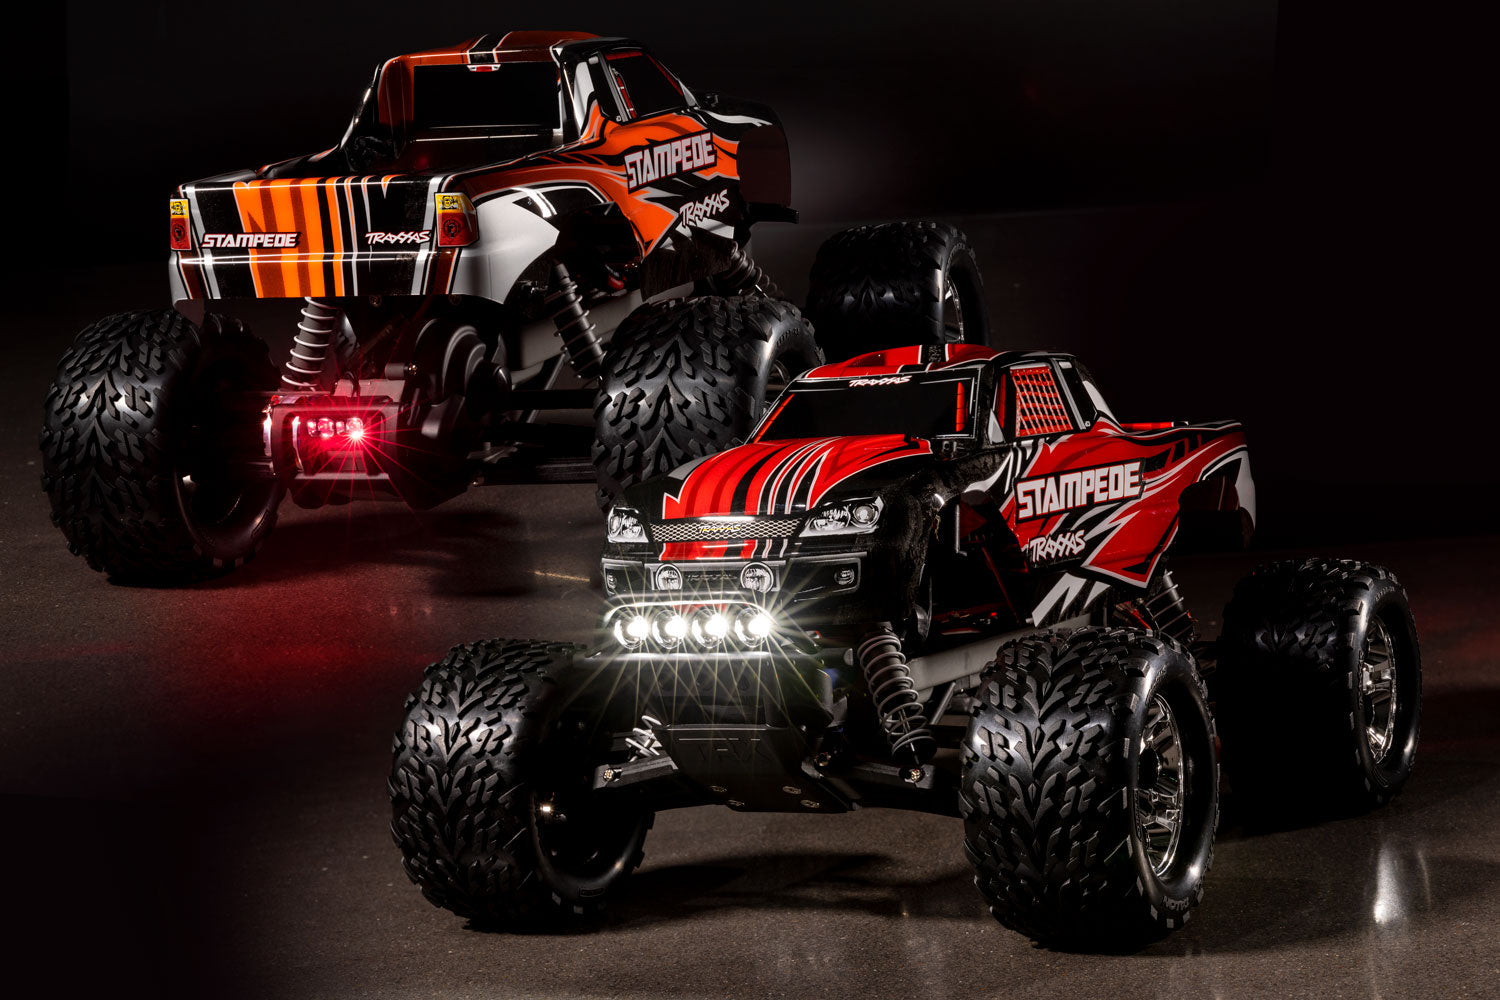 Traxxas Stampede 2wd 1/10 RTR Monster Truck con juego de luces LED